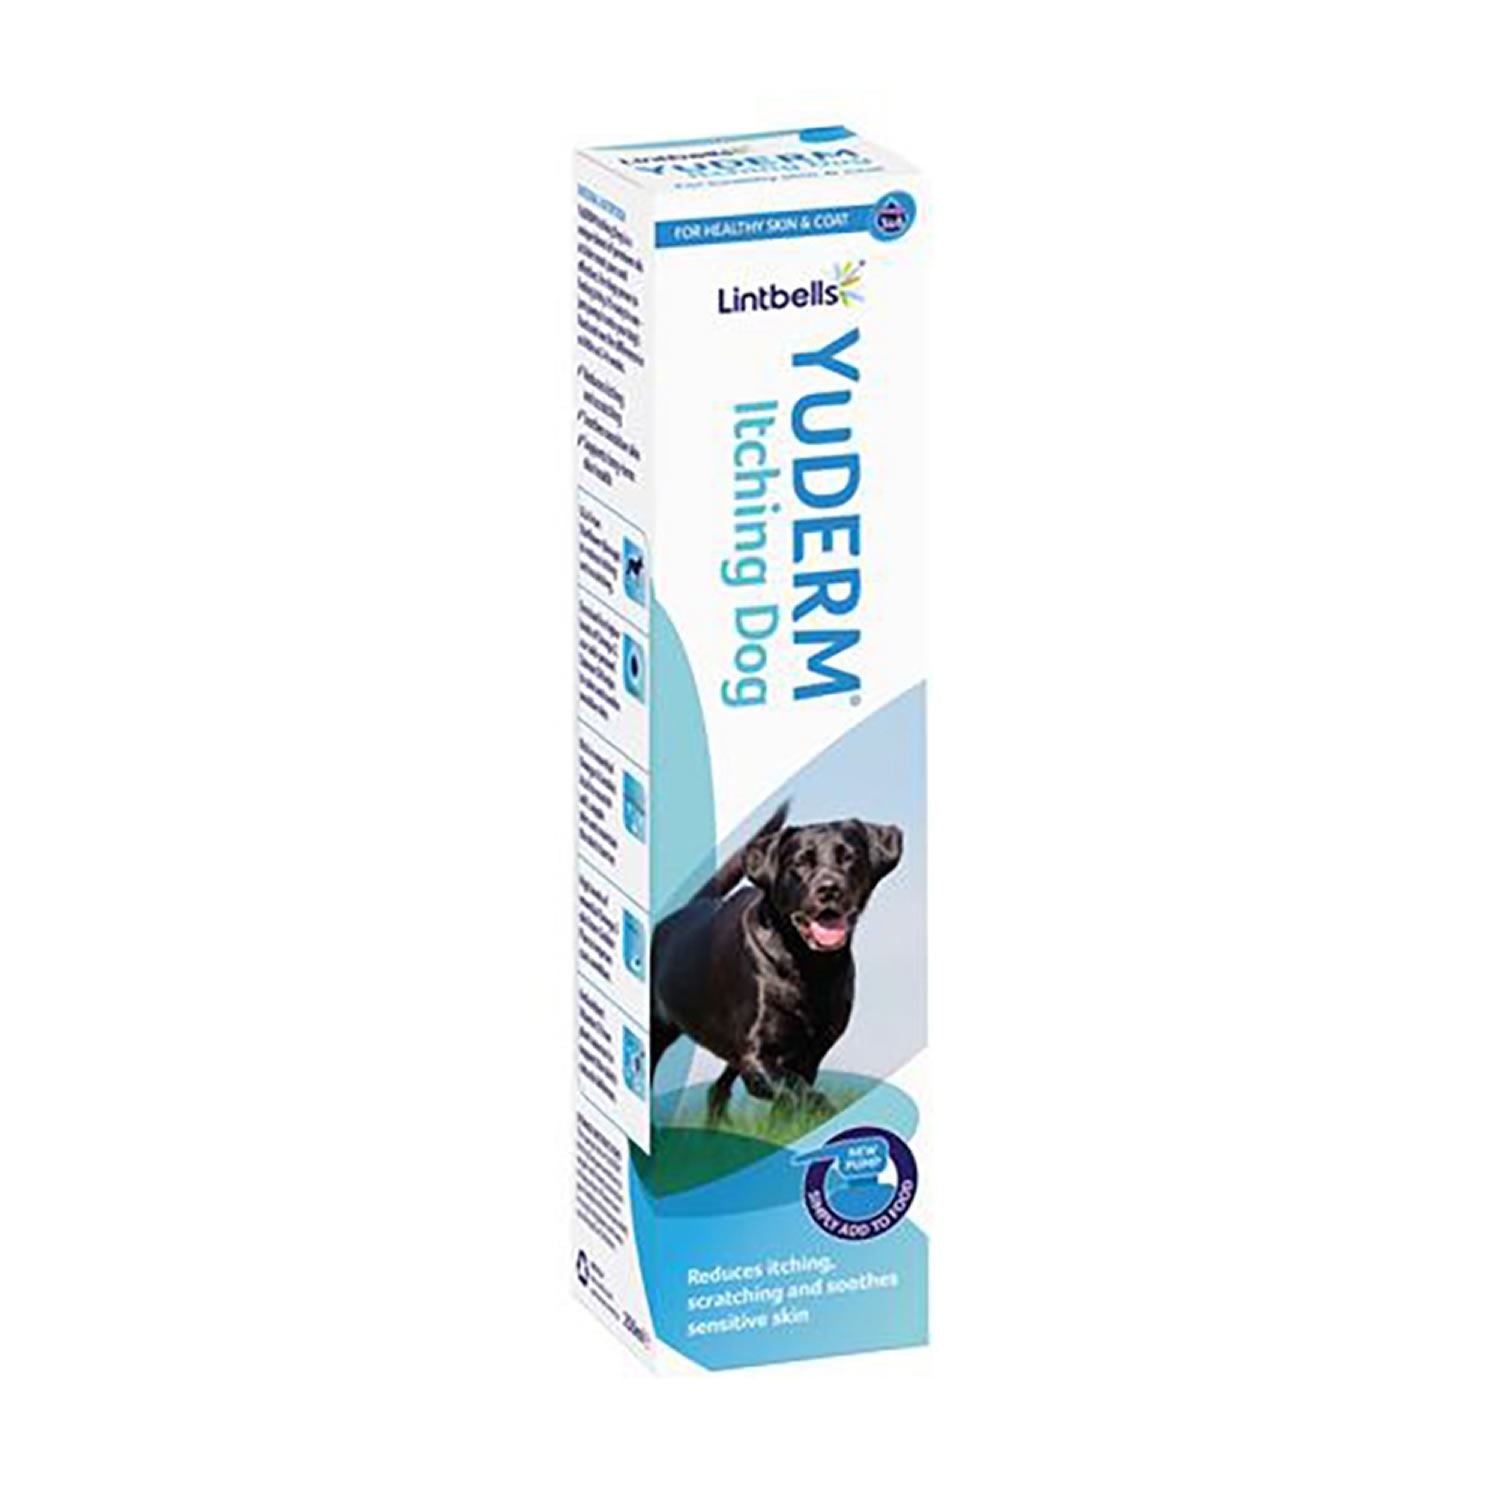 Lintbells Yuderm Itching Dog - Just Horse Riders